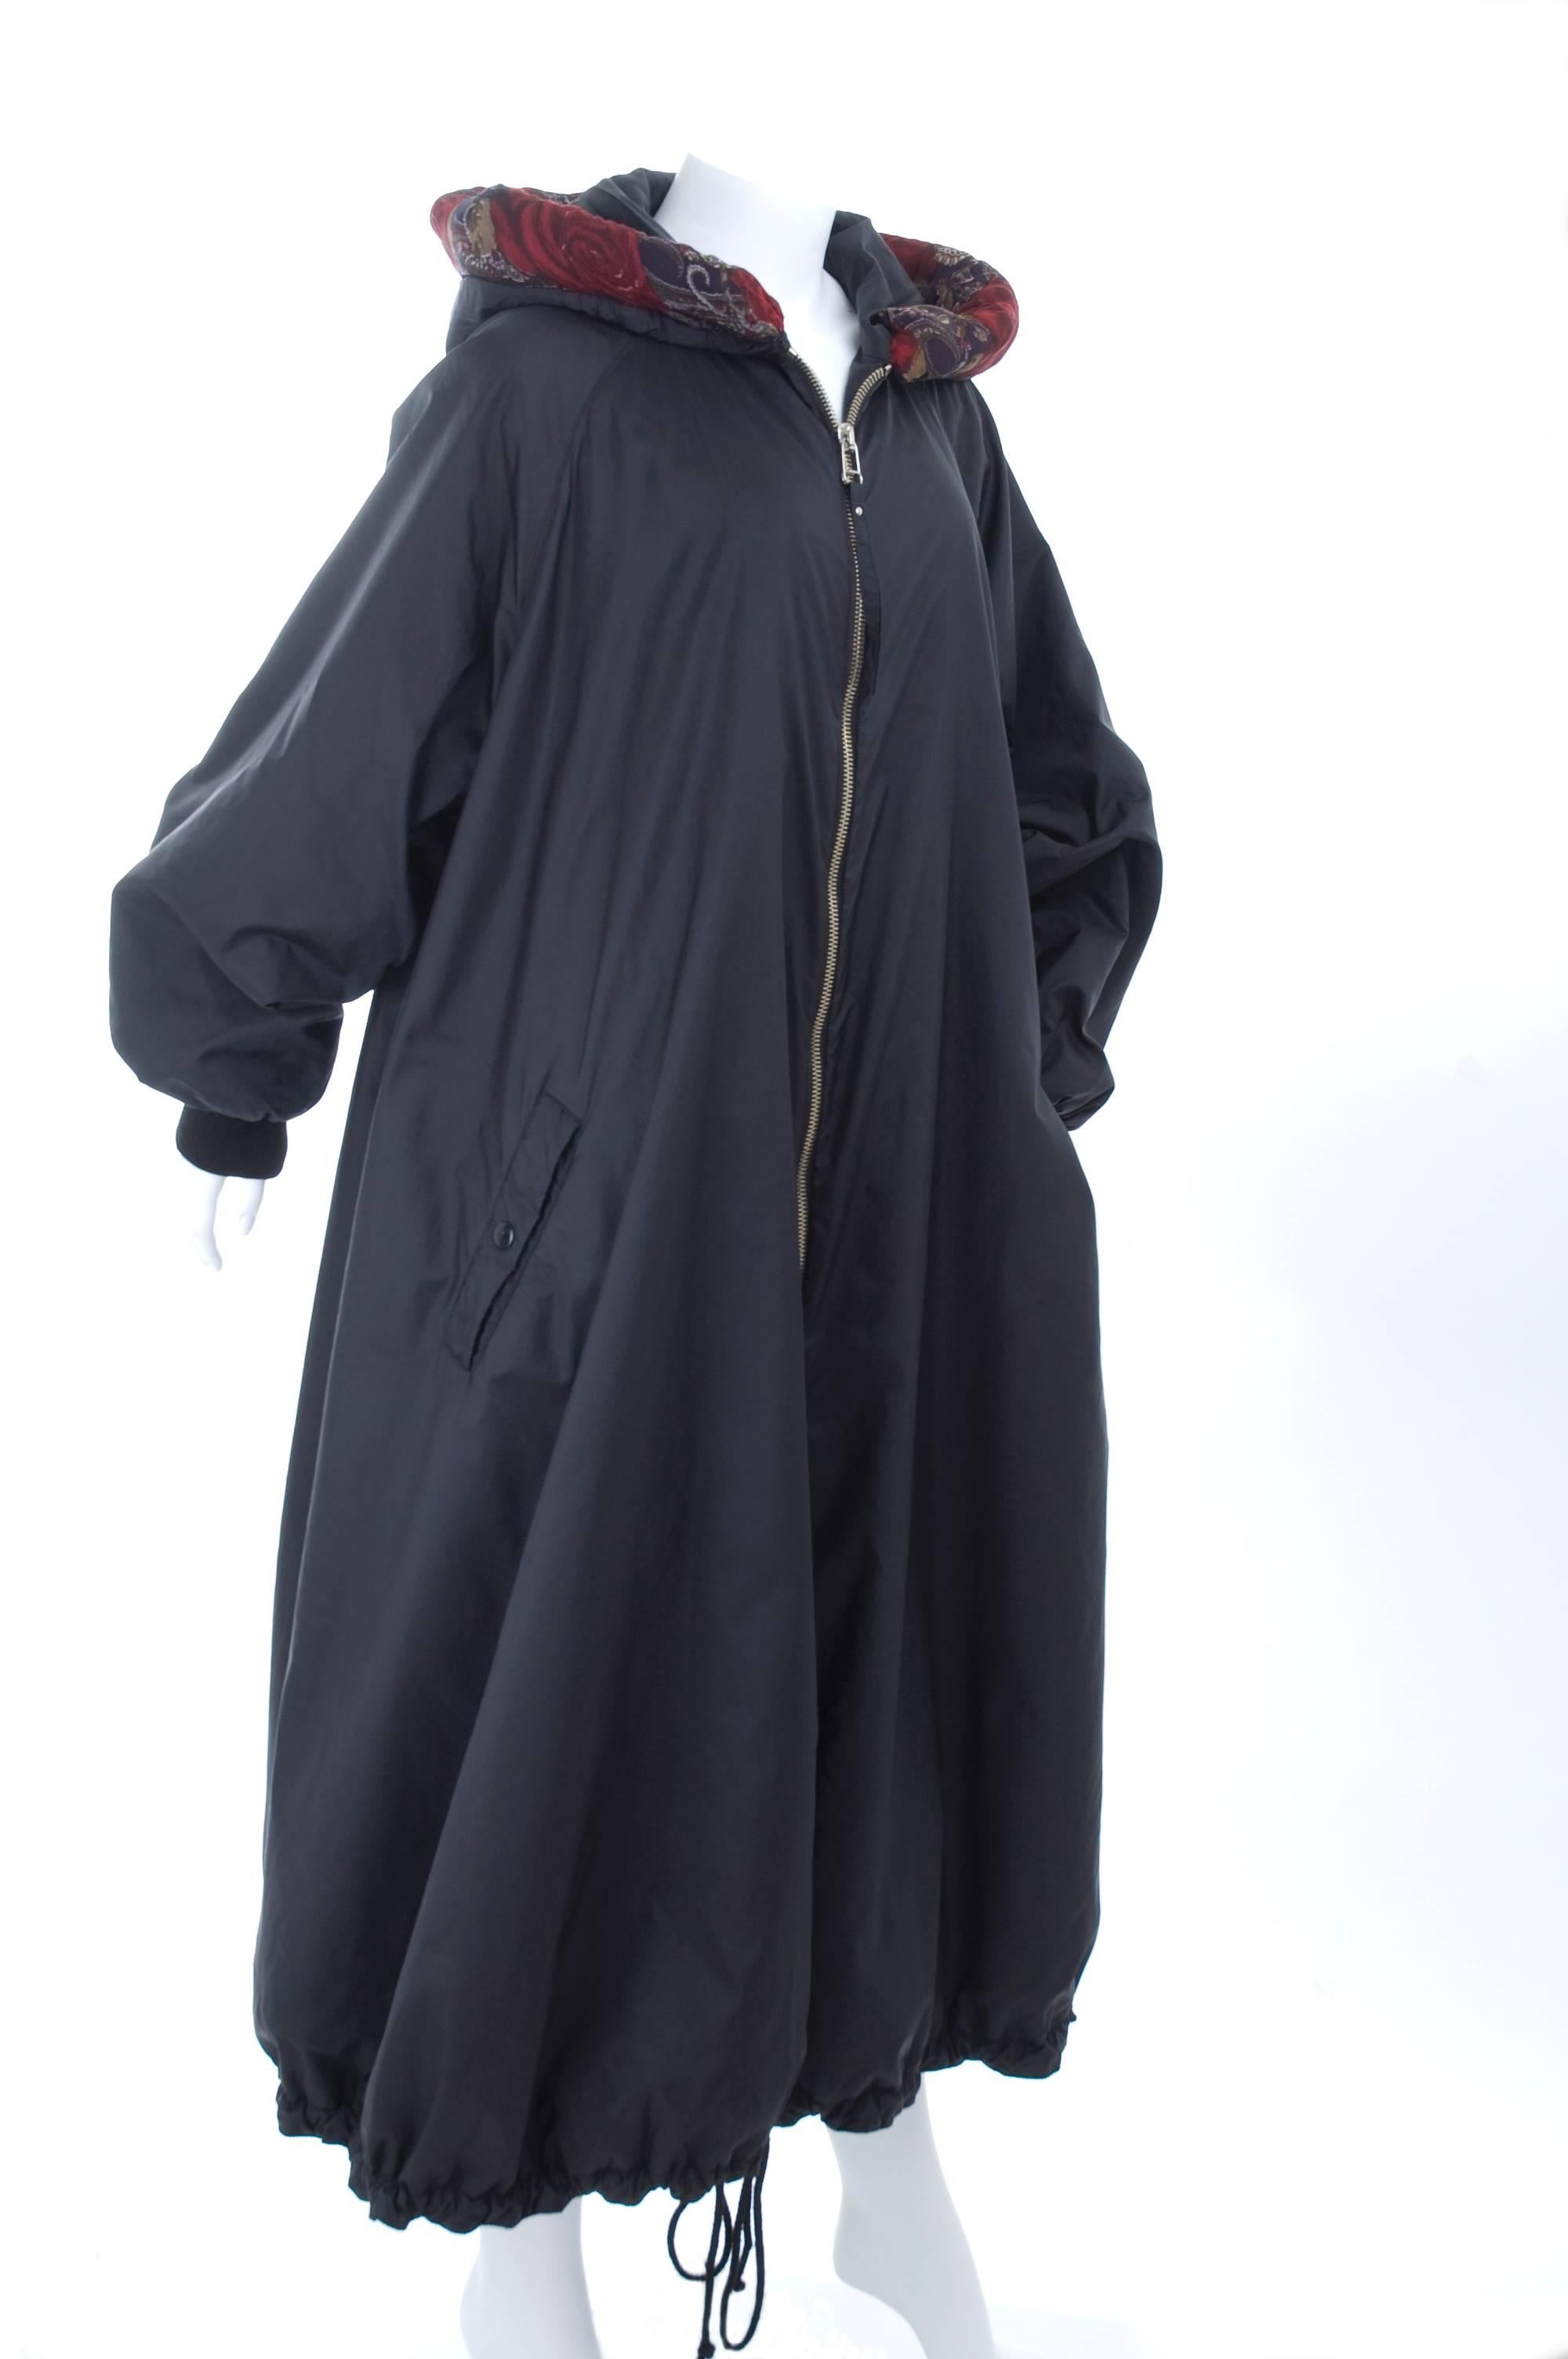 Vintage 90s Jean Paul Gaultier Femme balloon or swing puffer coat with hood in black. Long zipper as closure and side pockets with snap button.
100% Nylon.
Size US 8
Measurements:
Length 48